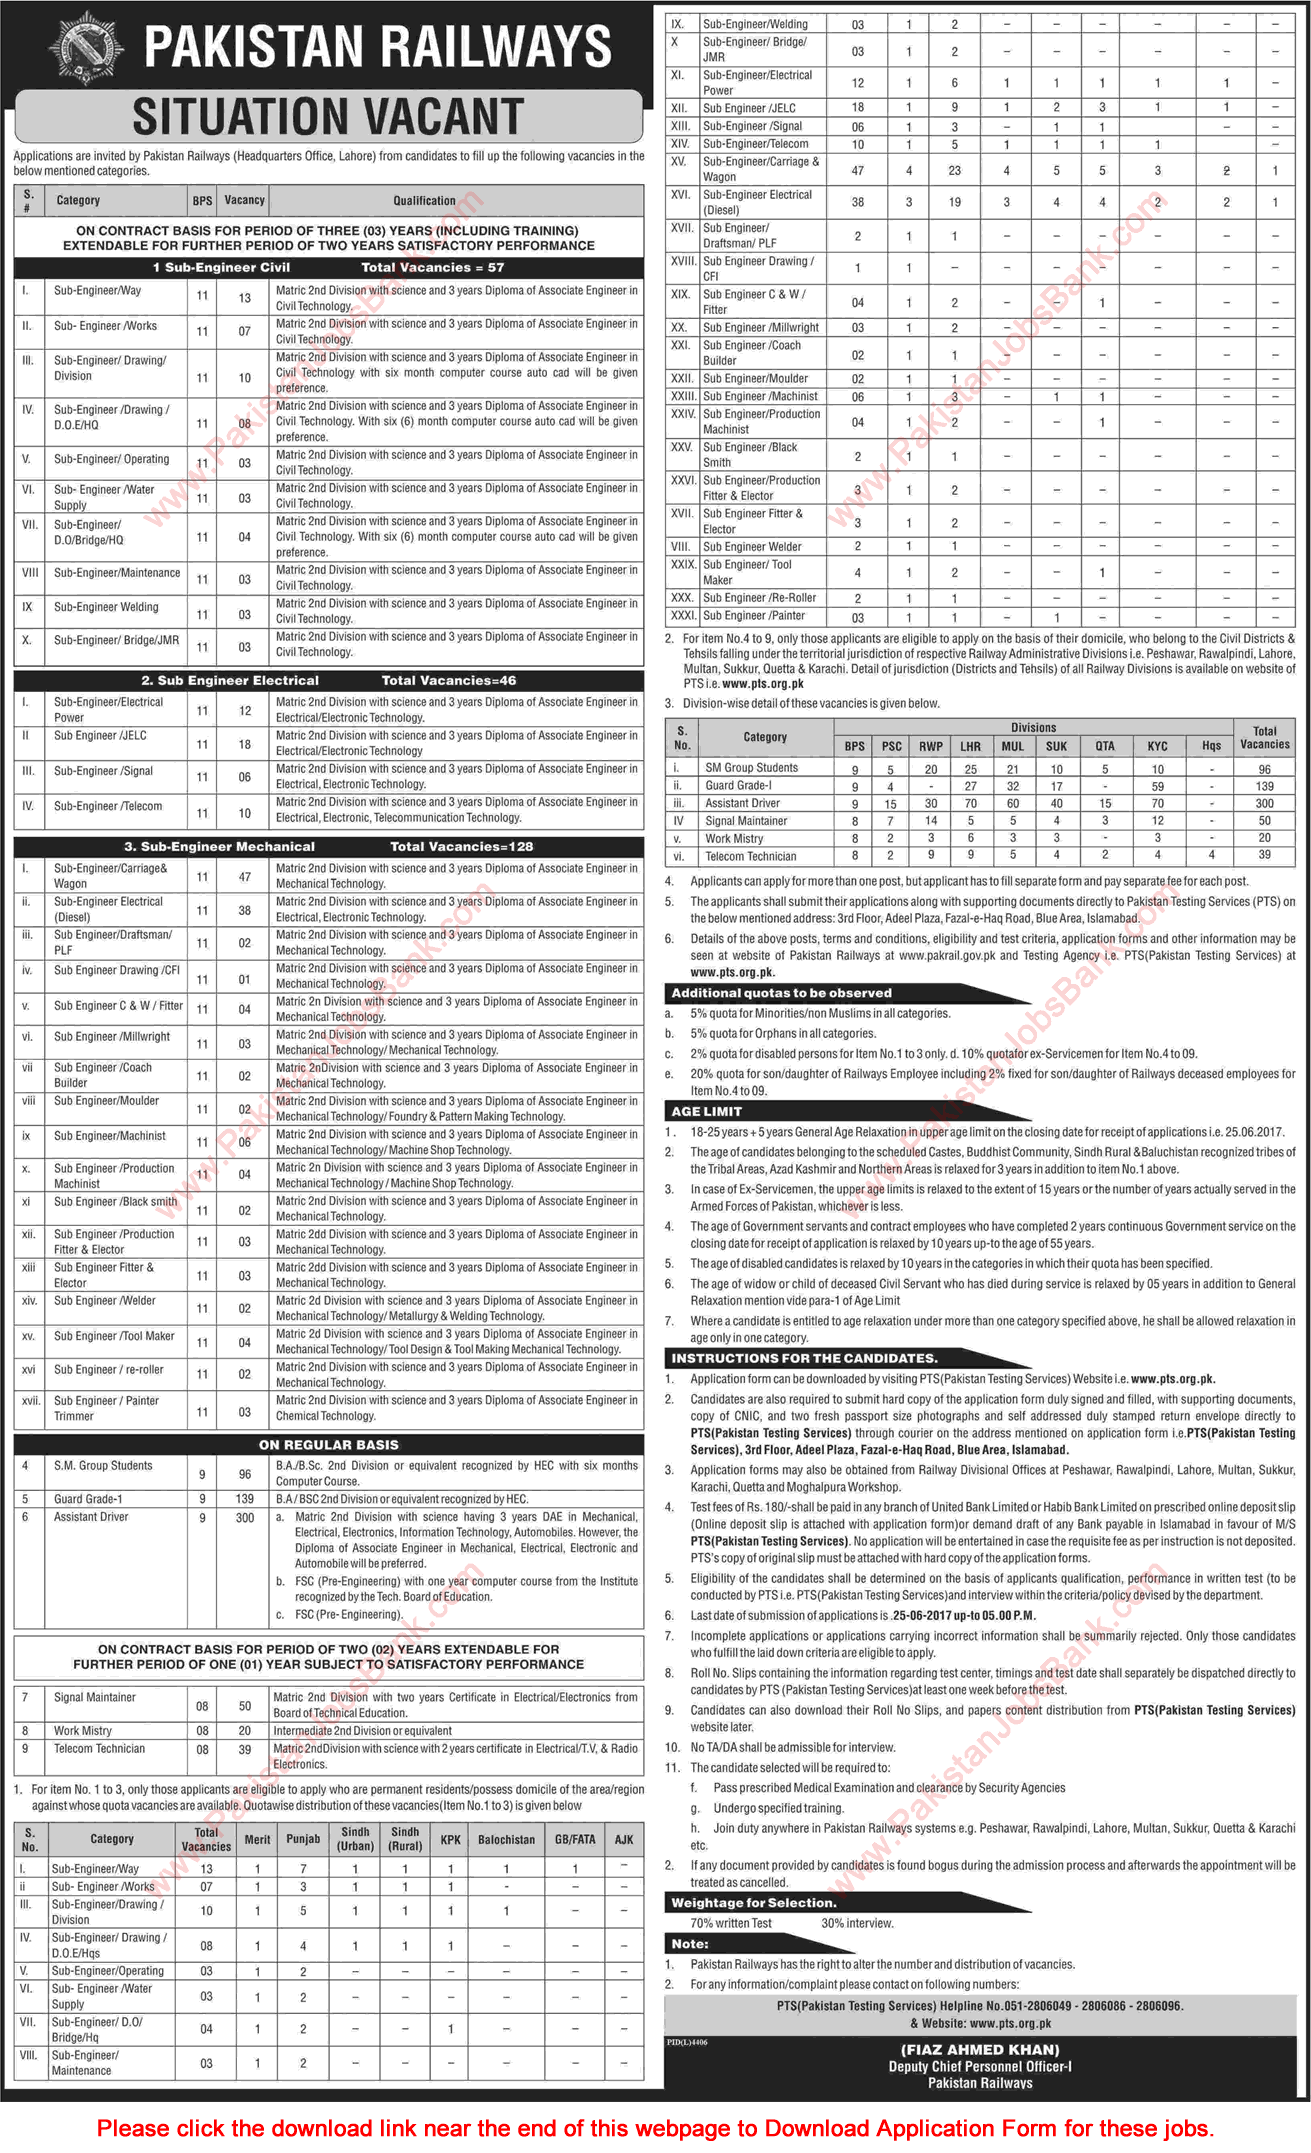 Pakistan Railways Jobs June 2017 PTS Application Form for Sub Engineers, Assistants Drivers, Guards & Others Latest